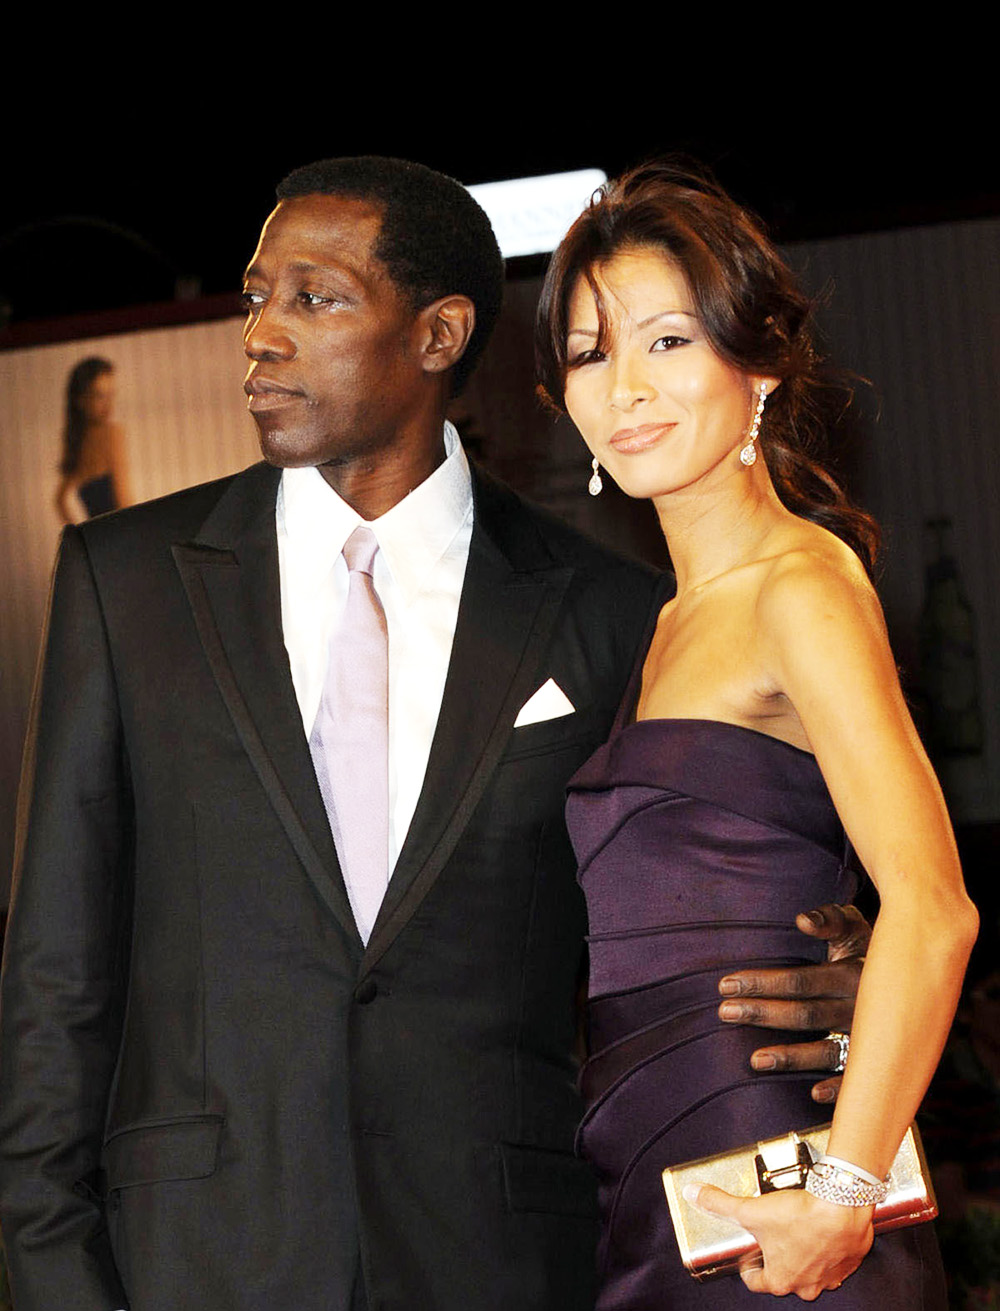 Wesley Snipes and Family See Photos Of The Actor With His Wife image